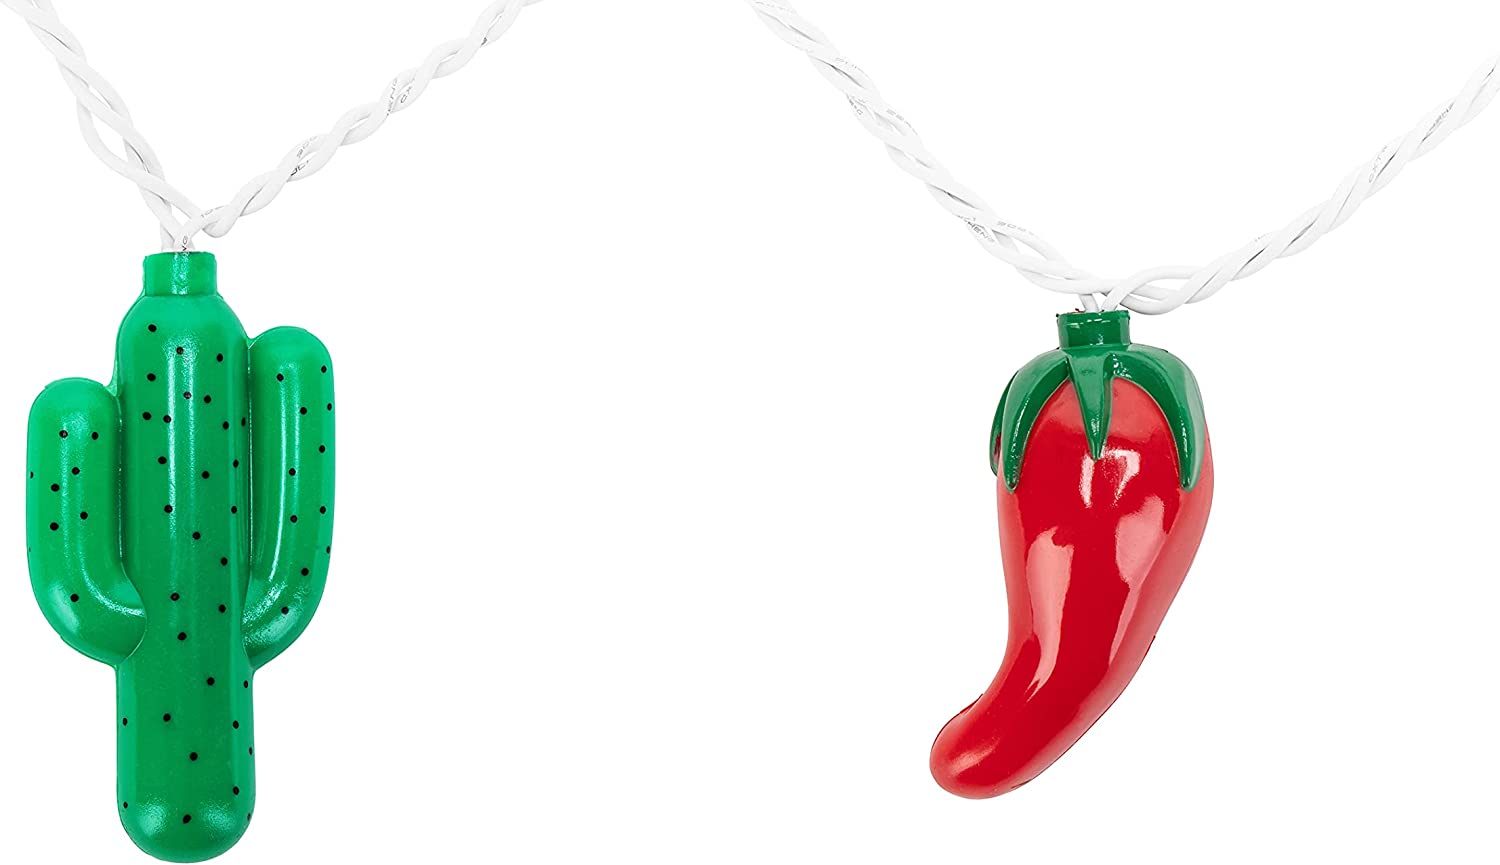 Camco 42659 Chili and Cactus Party Light